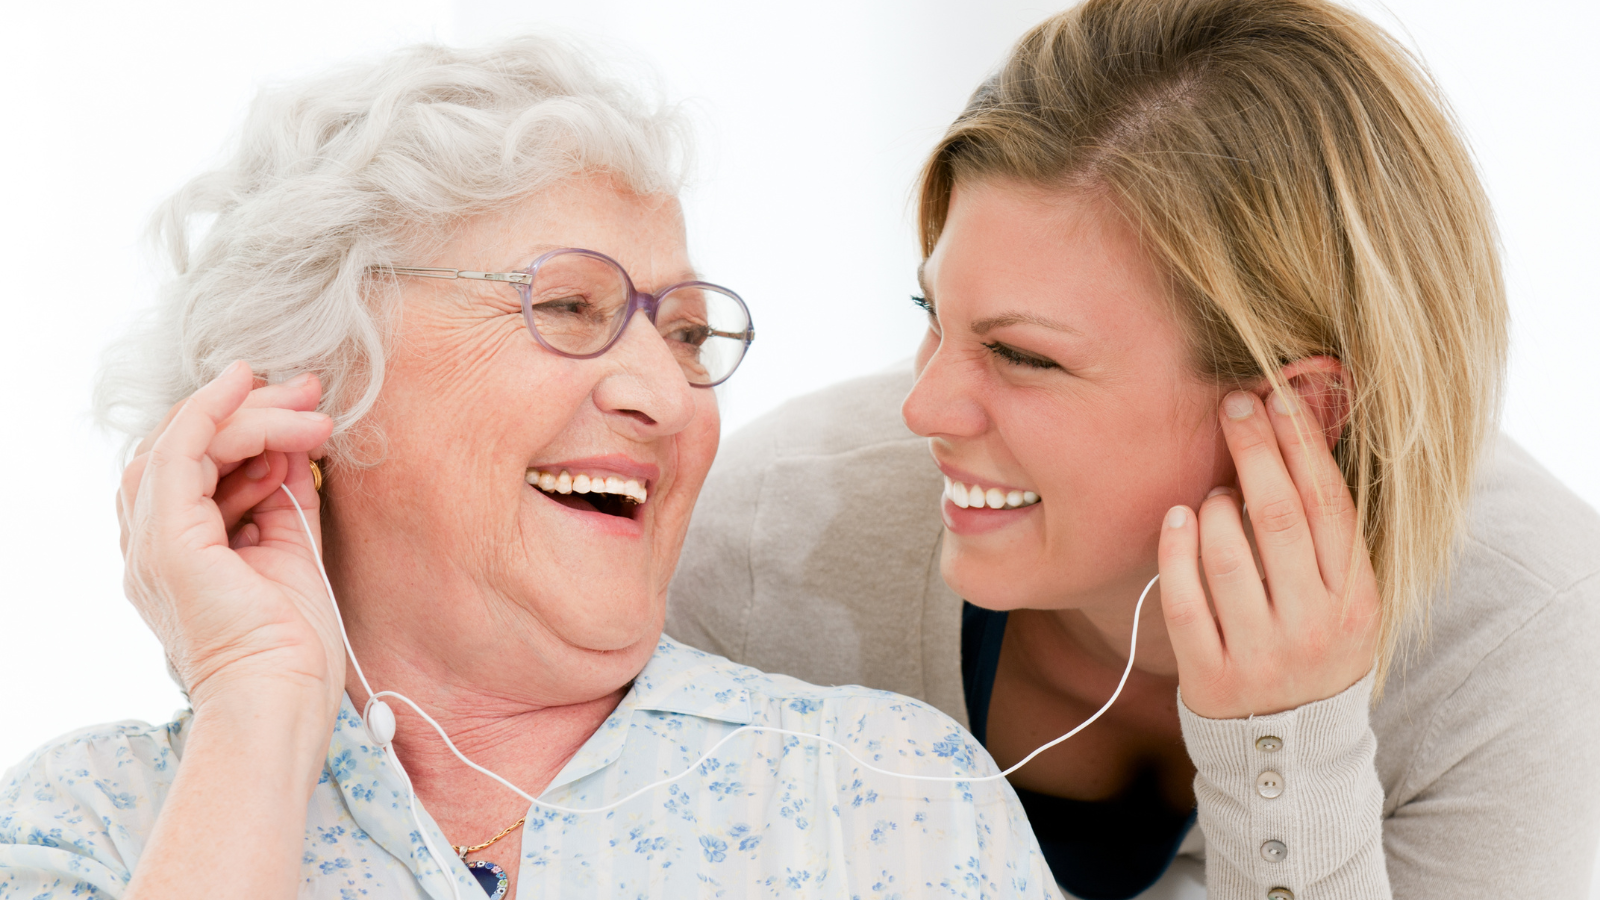 mother and daughter listening to music